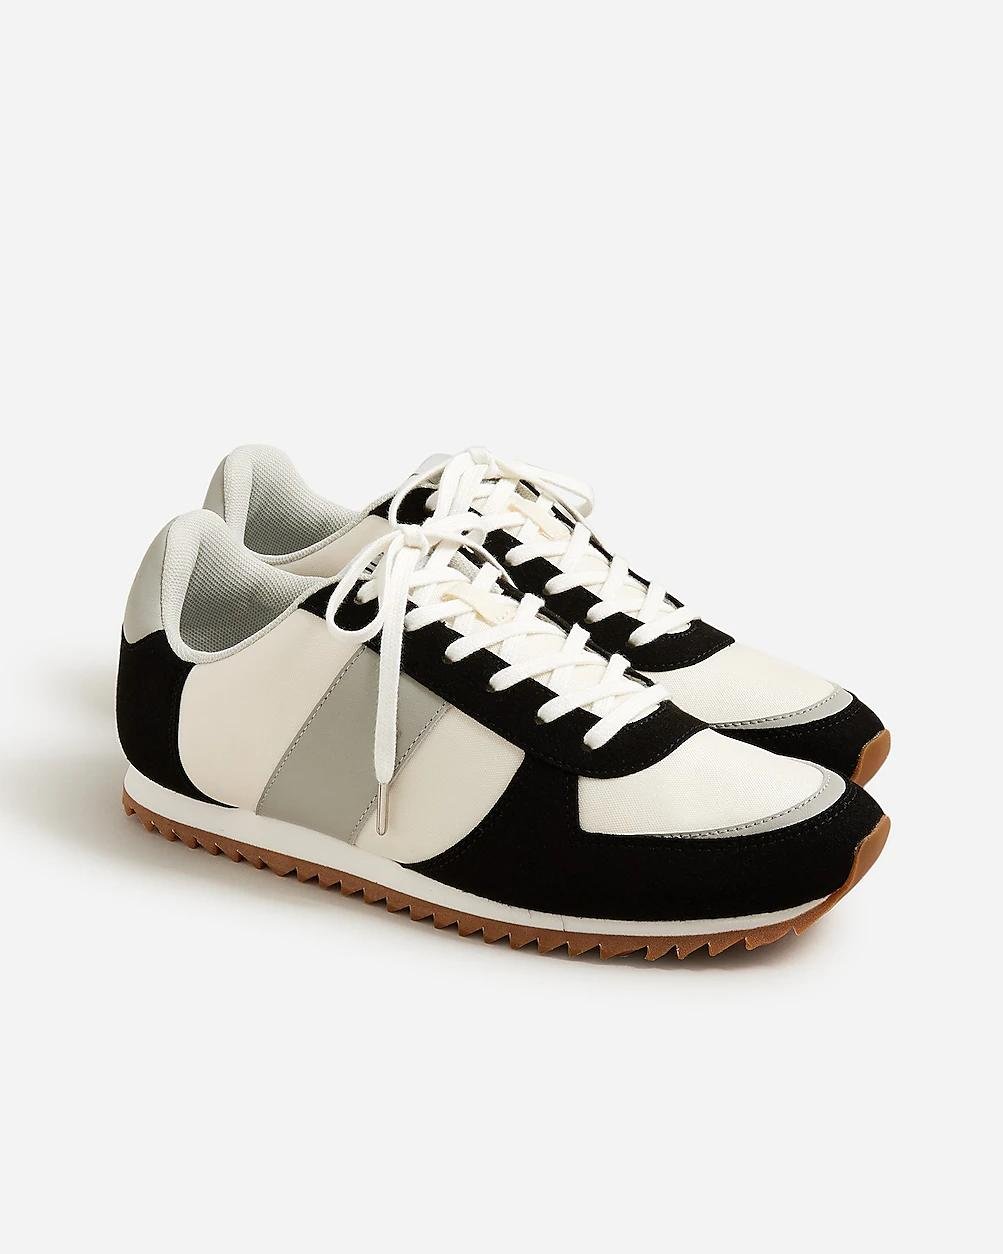 J.Crew trainers in colorblock by J.CREW